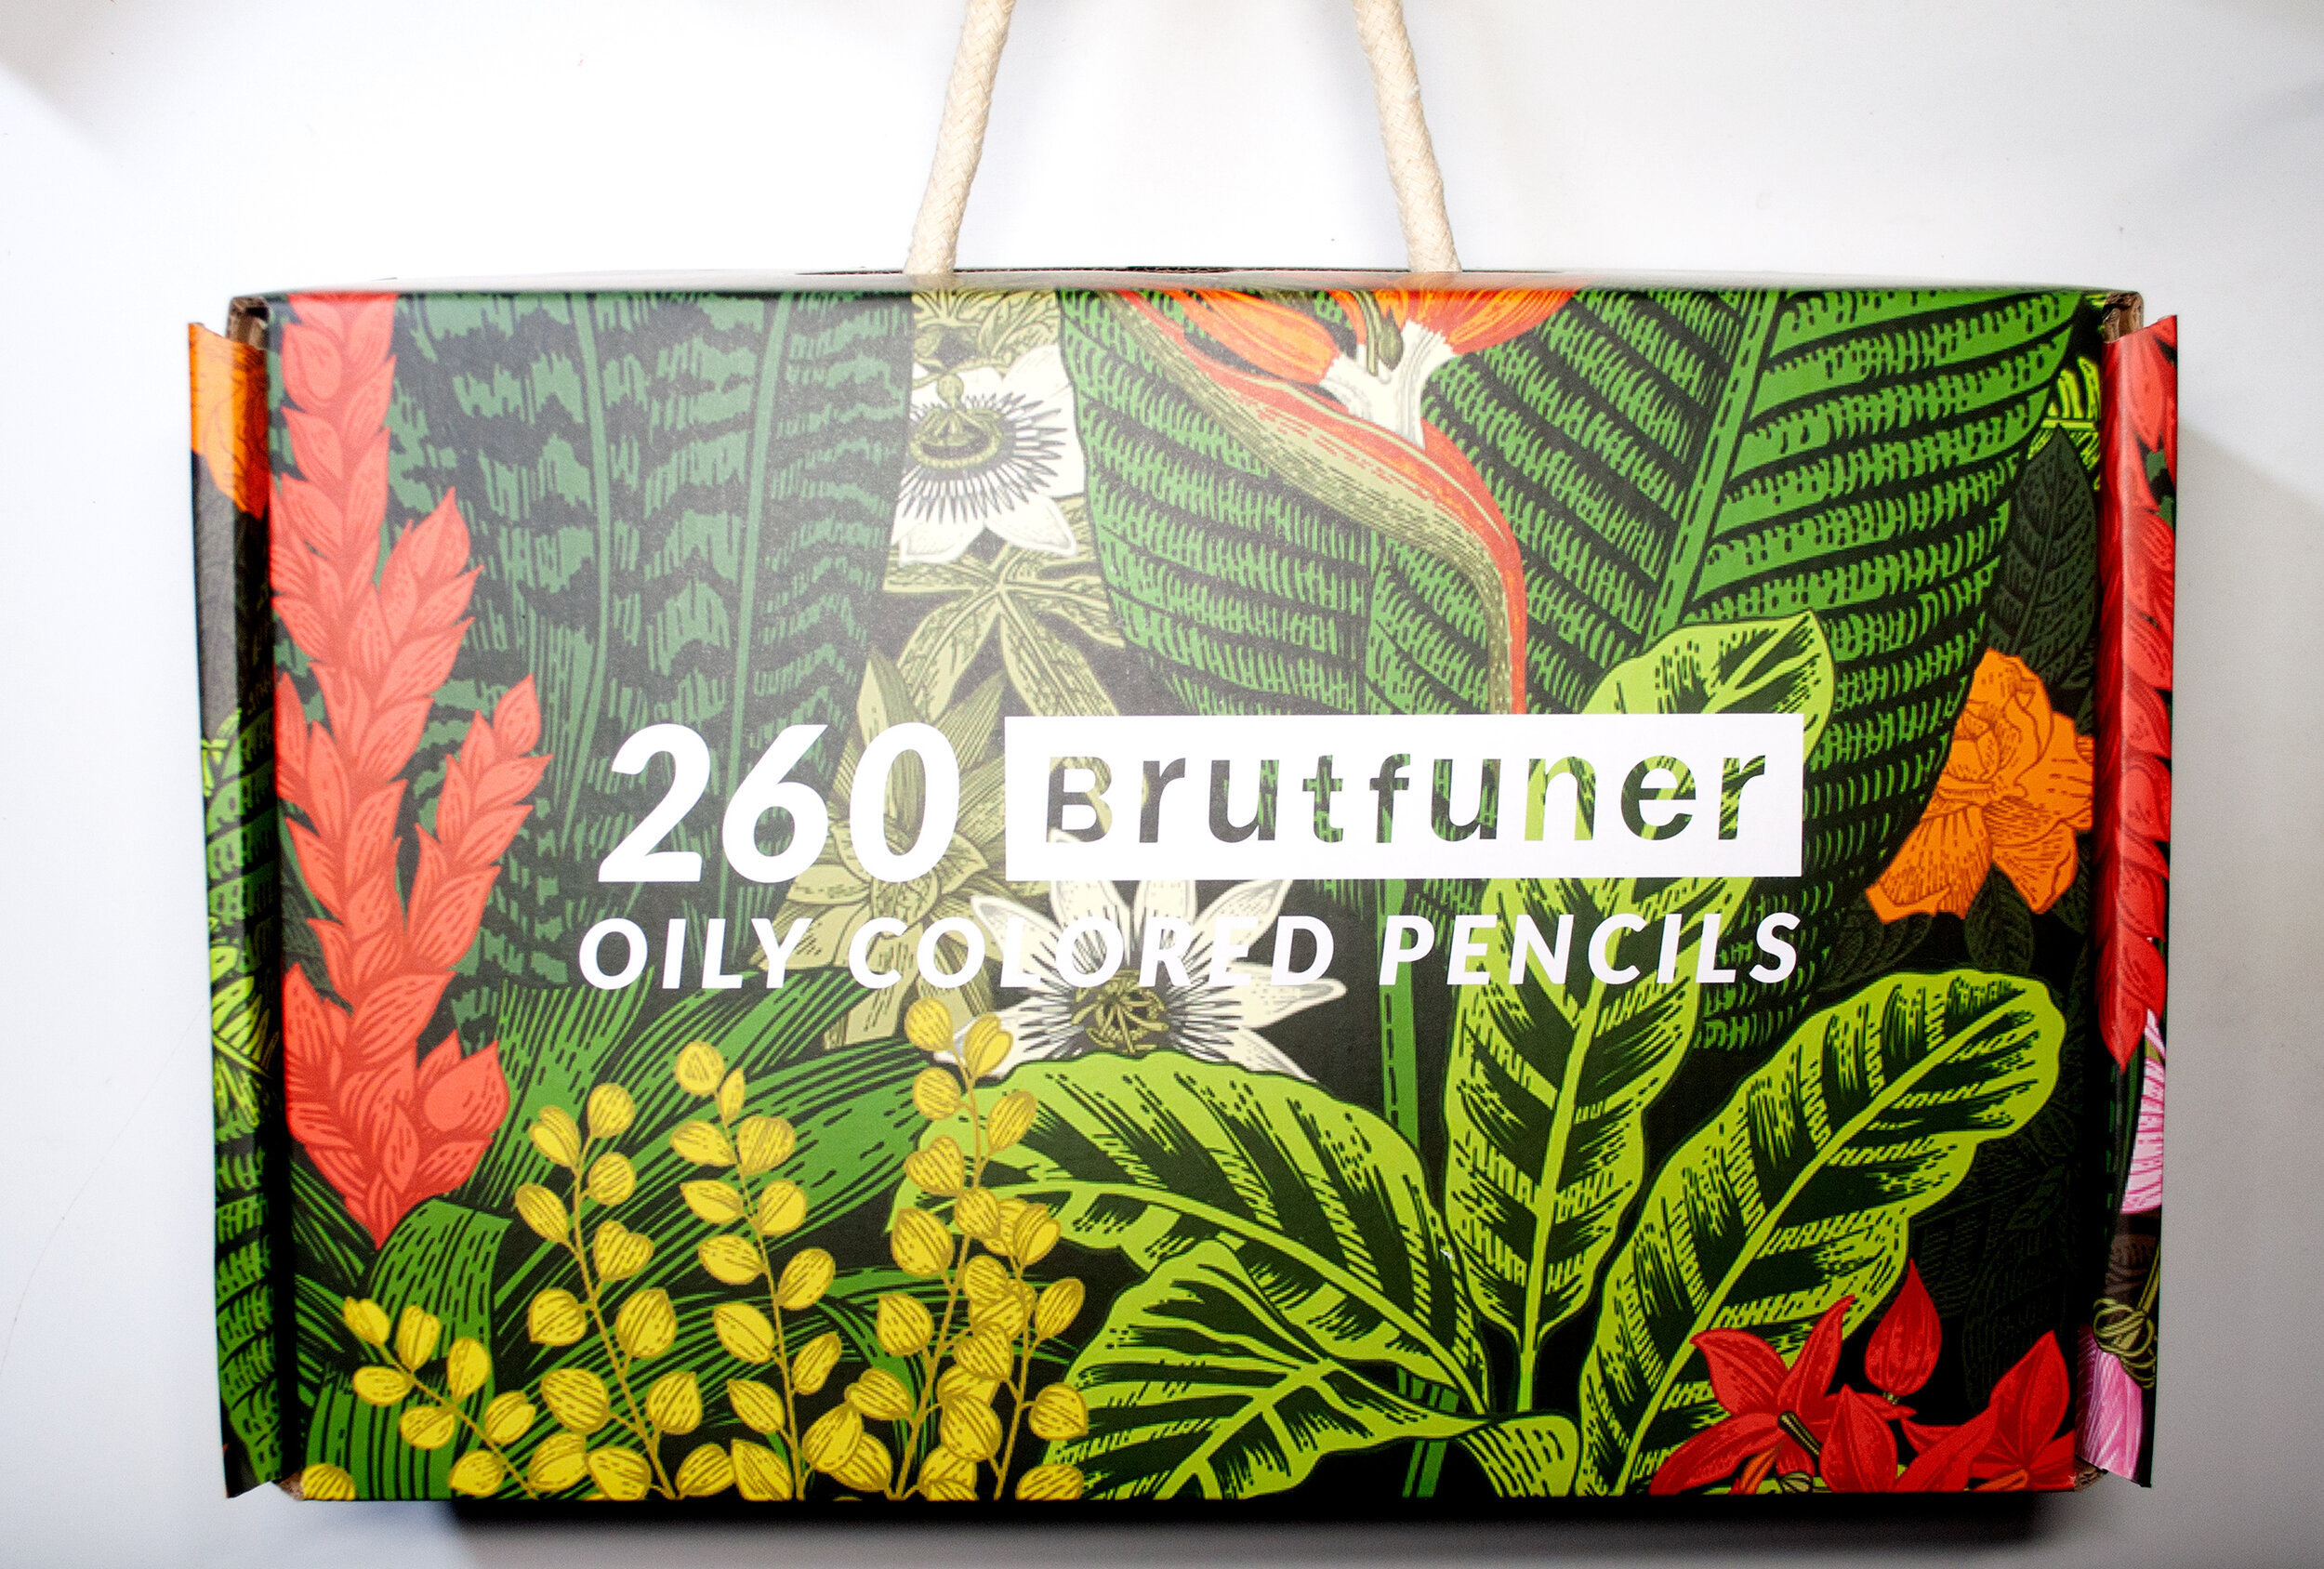 Temu Find  Speed Swatching the Brutfuner 520 Student Grade Colored Pencils  Pt. 1 